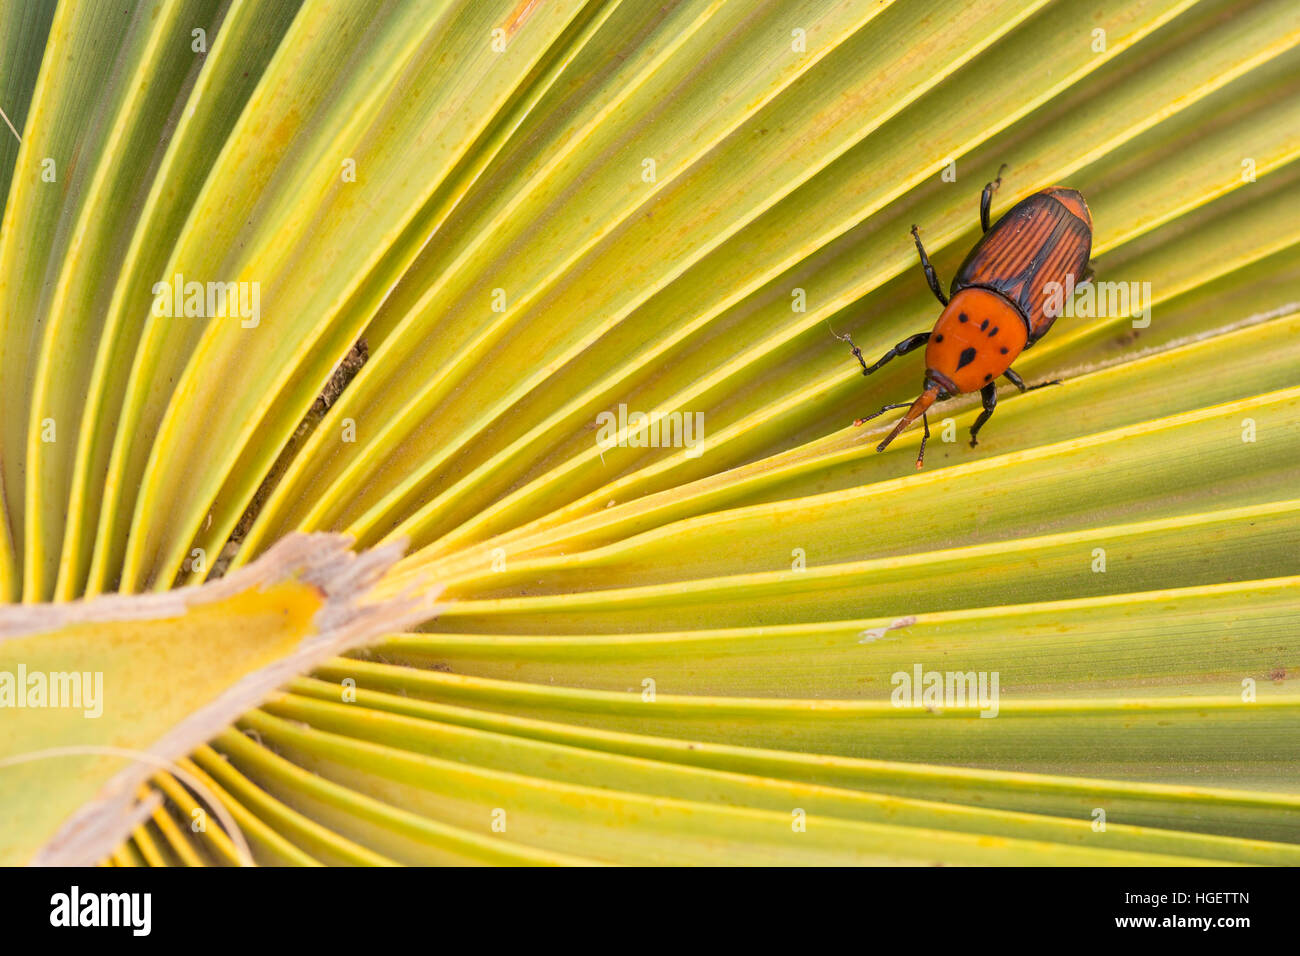 Adult red palm weevil (Rhynchophorus ferrugineus) a species of snout beetle also known as the Asian palm weevil or sago palm weevil.  Weevil larvae ca Stock Photo